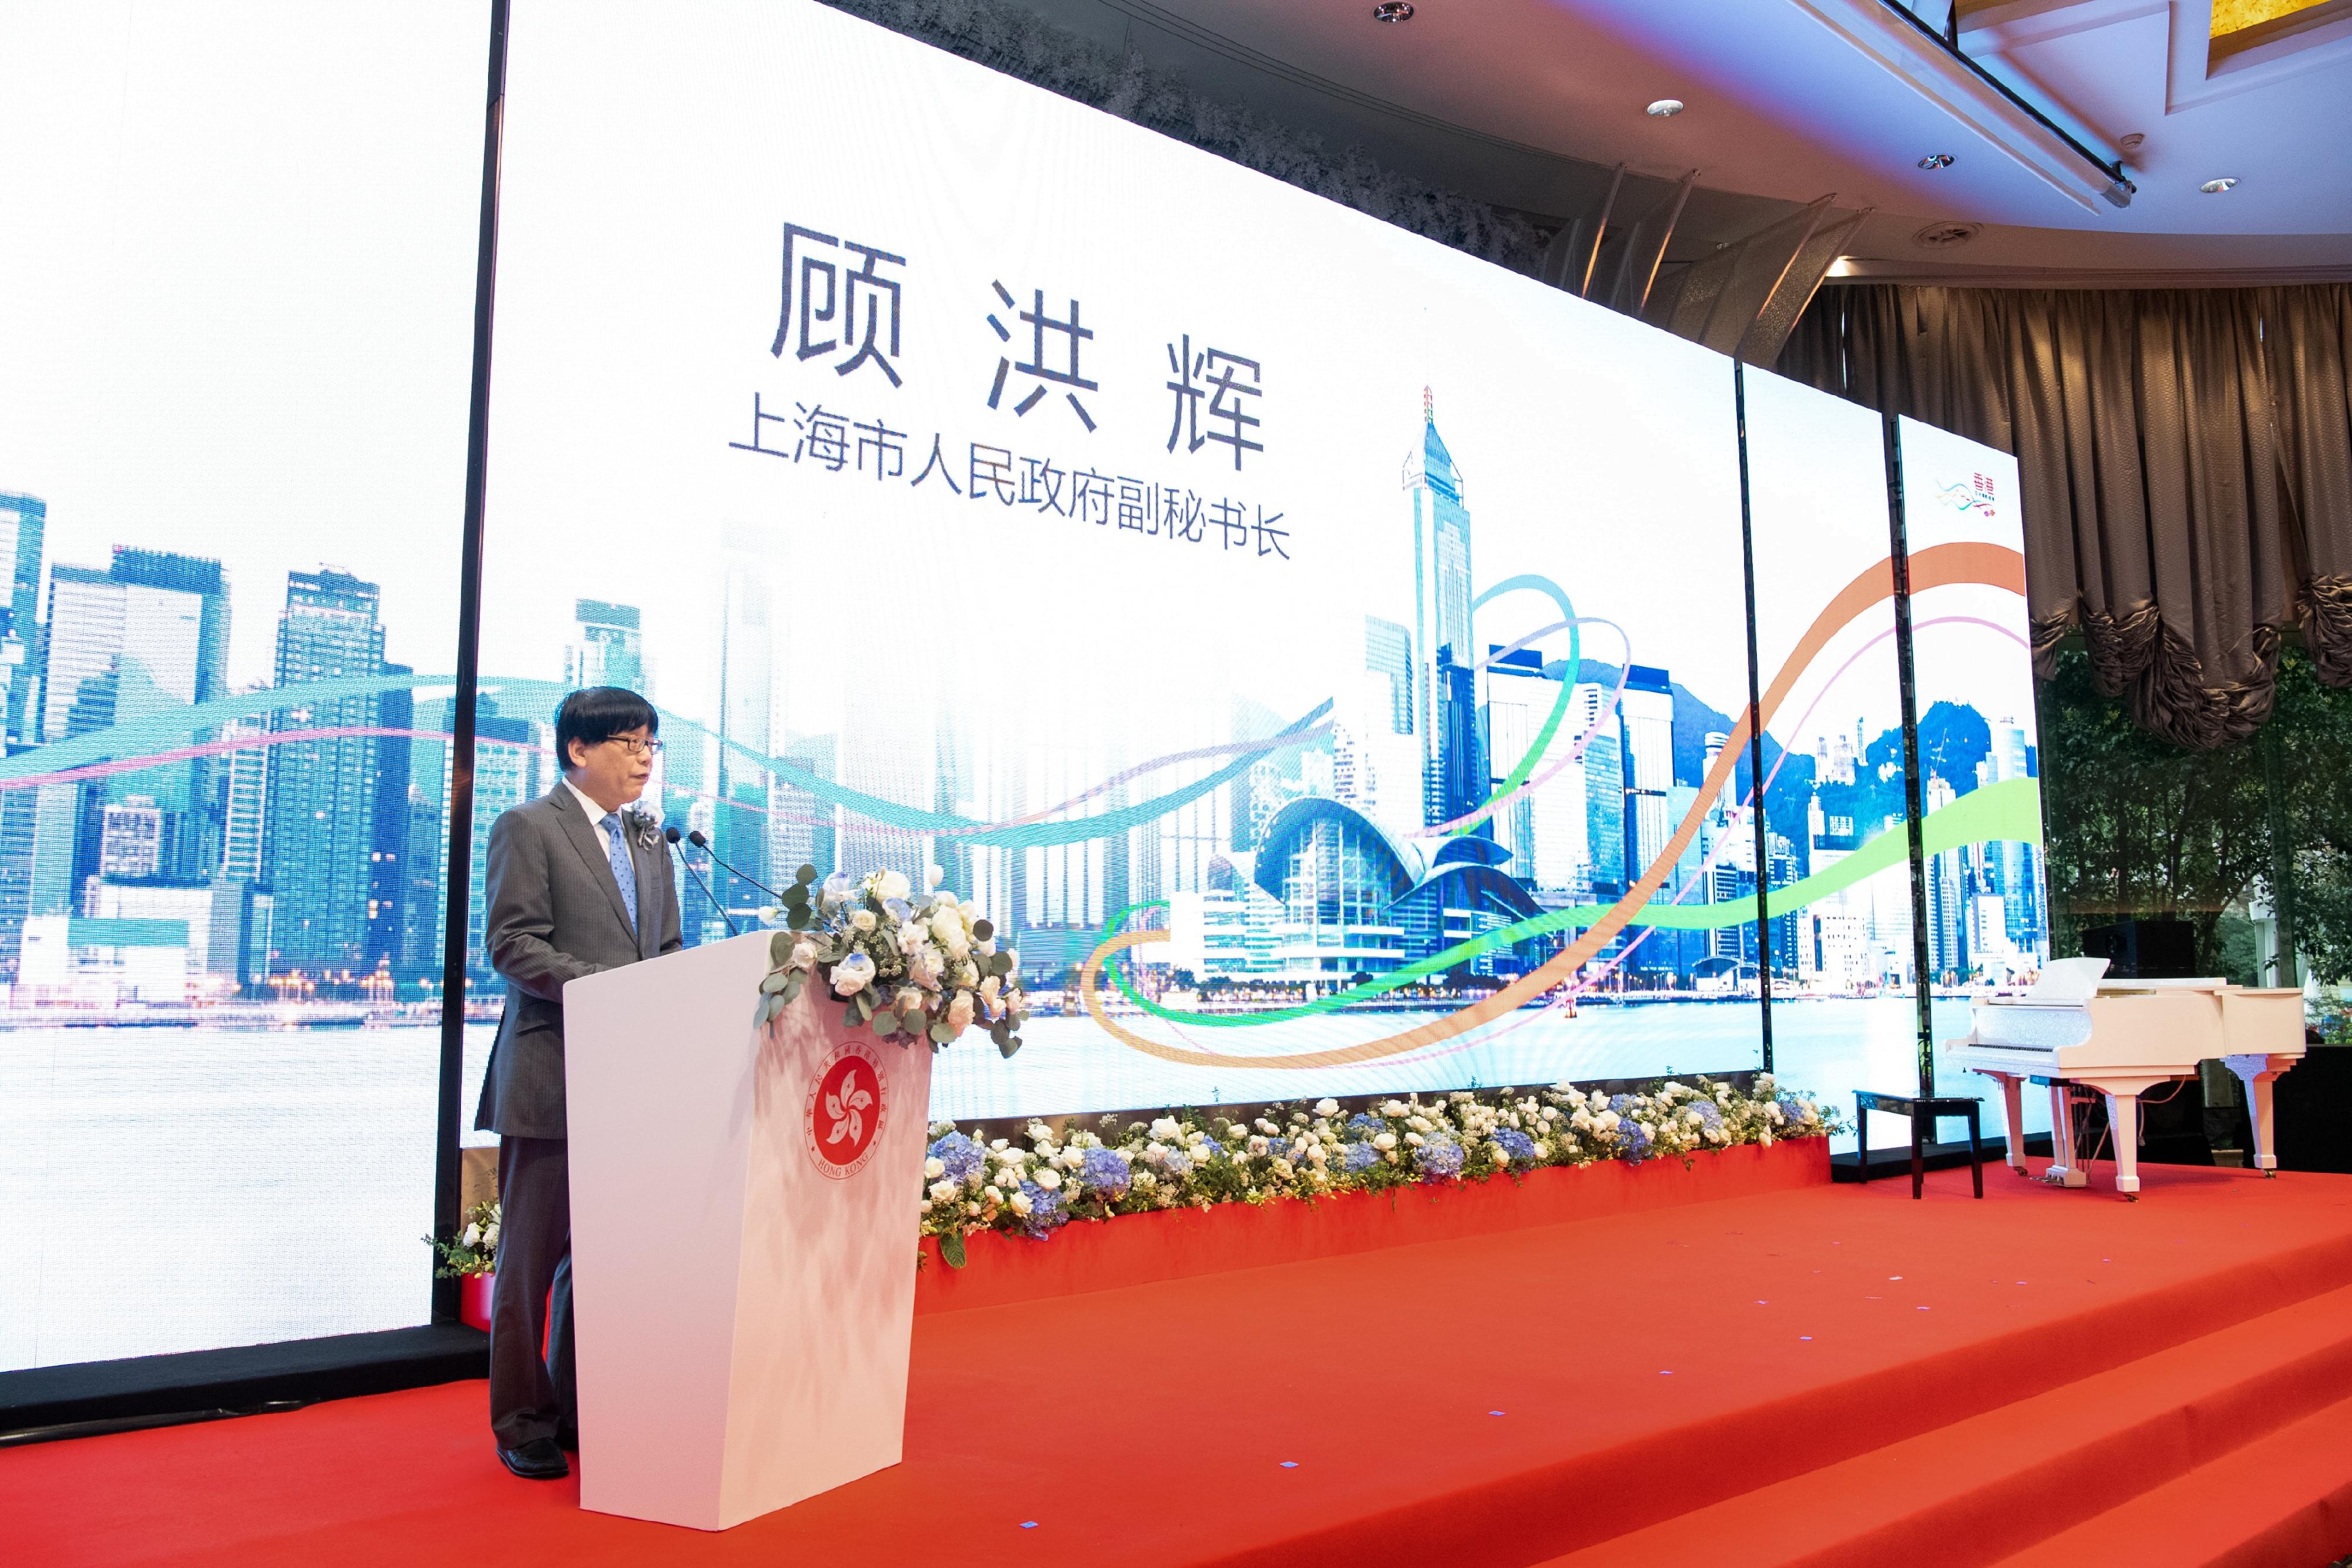 The Hong Kong Economic and Trade Office in Shanghai held a "Hello, Hong Kong!" East China Region Reception in Shanghai today (March 23). Photo shows Deputy Secretary-General of Shanghai Municipal People's Government Mr Gu Honghui delivering a speech at the reception.